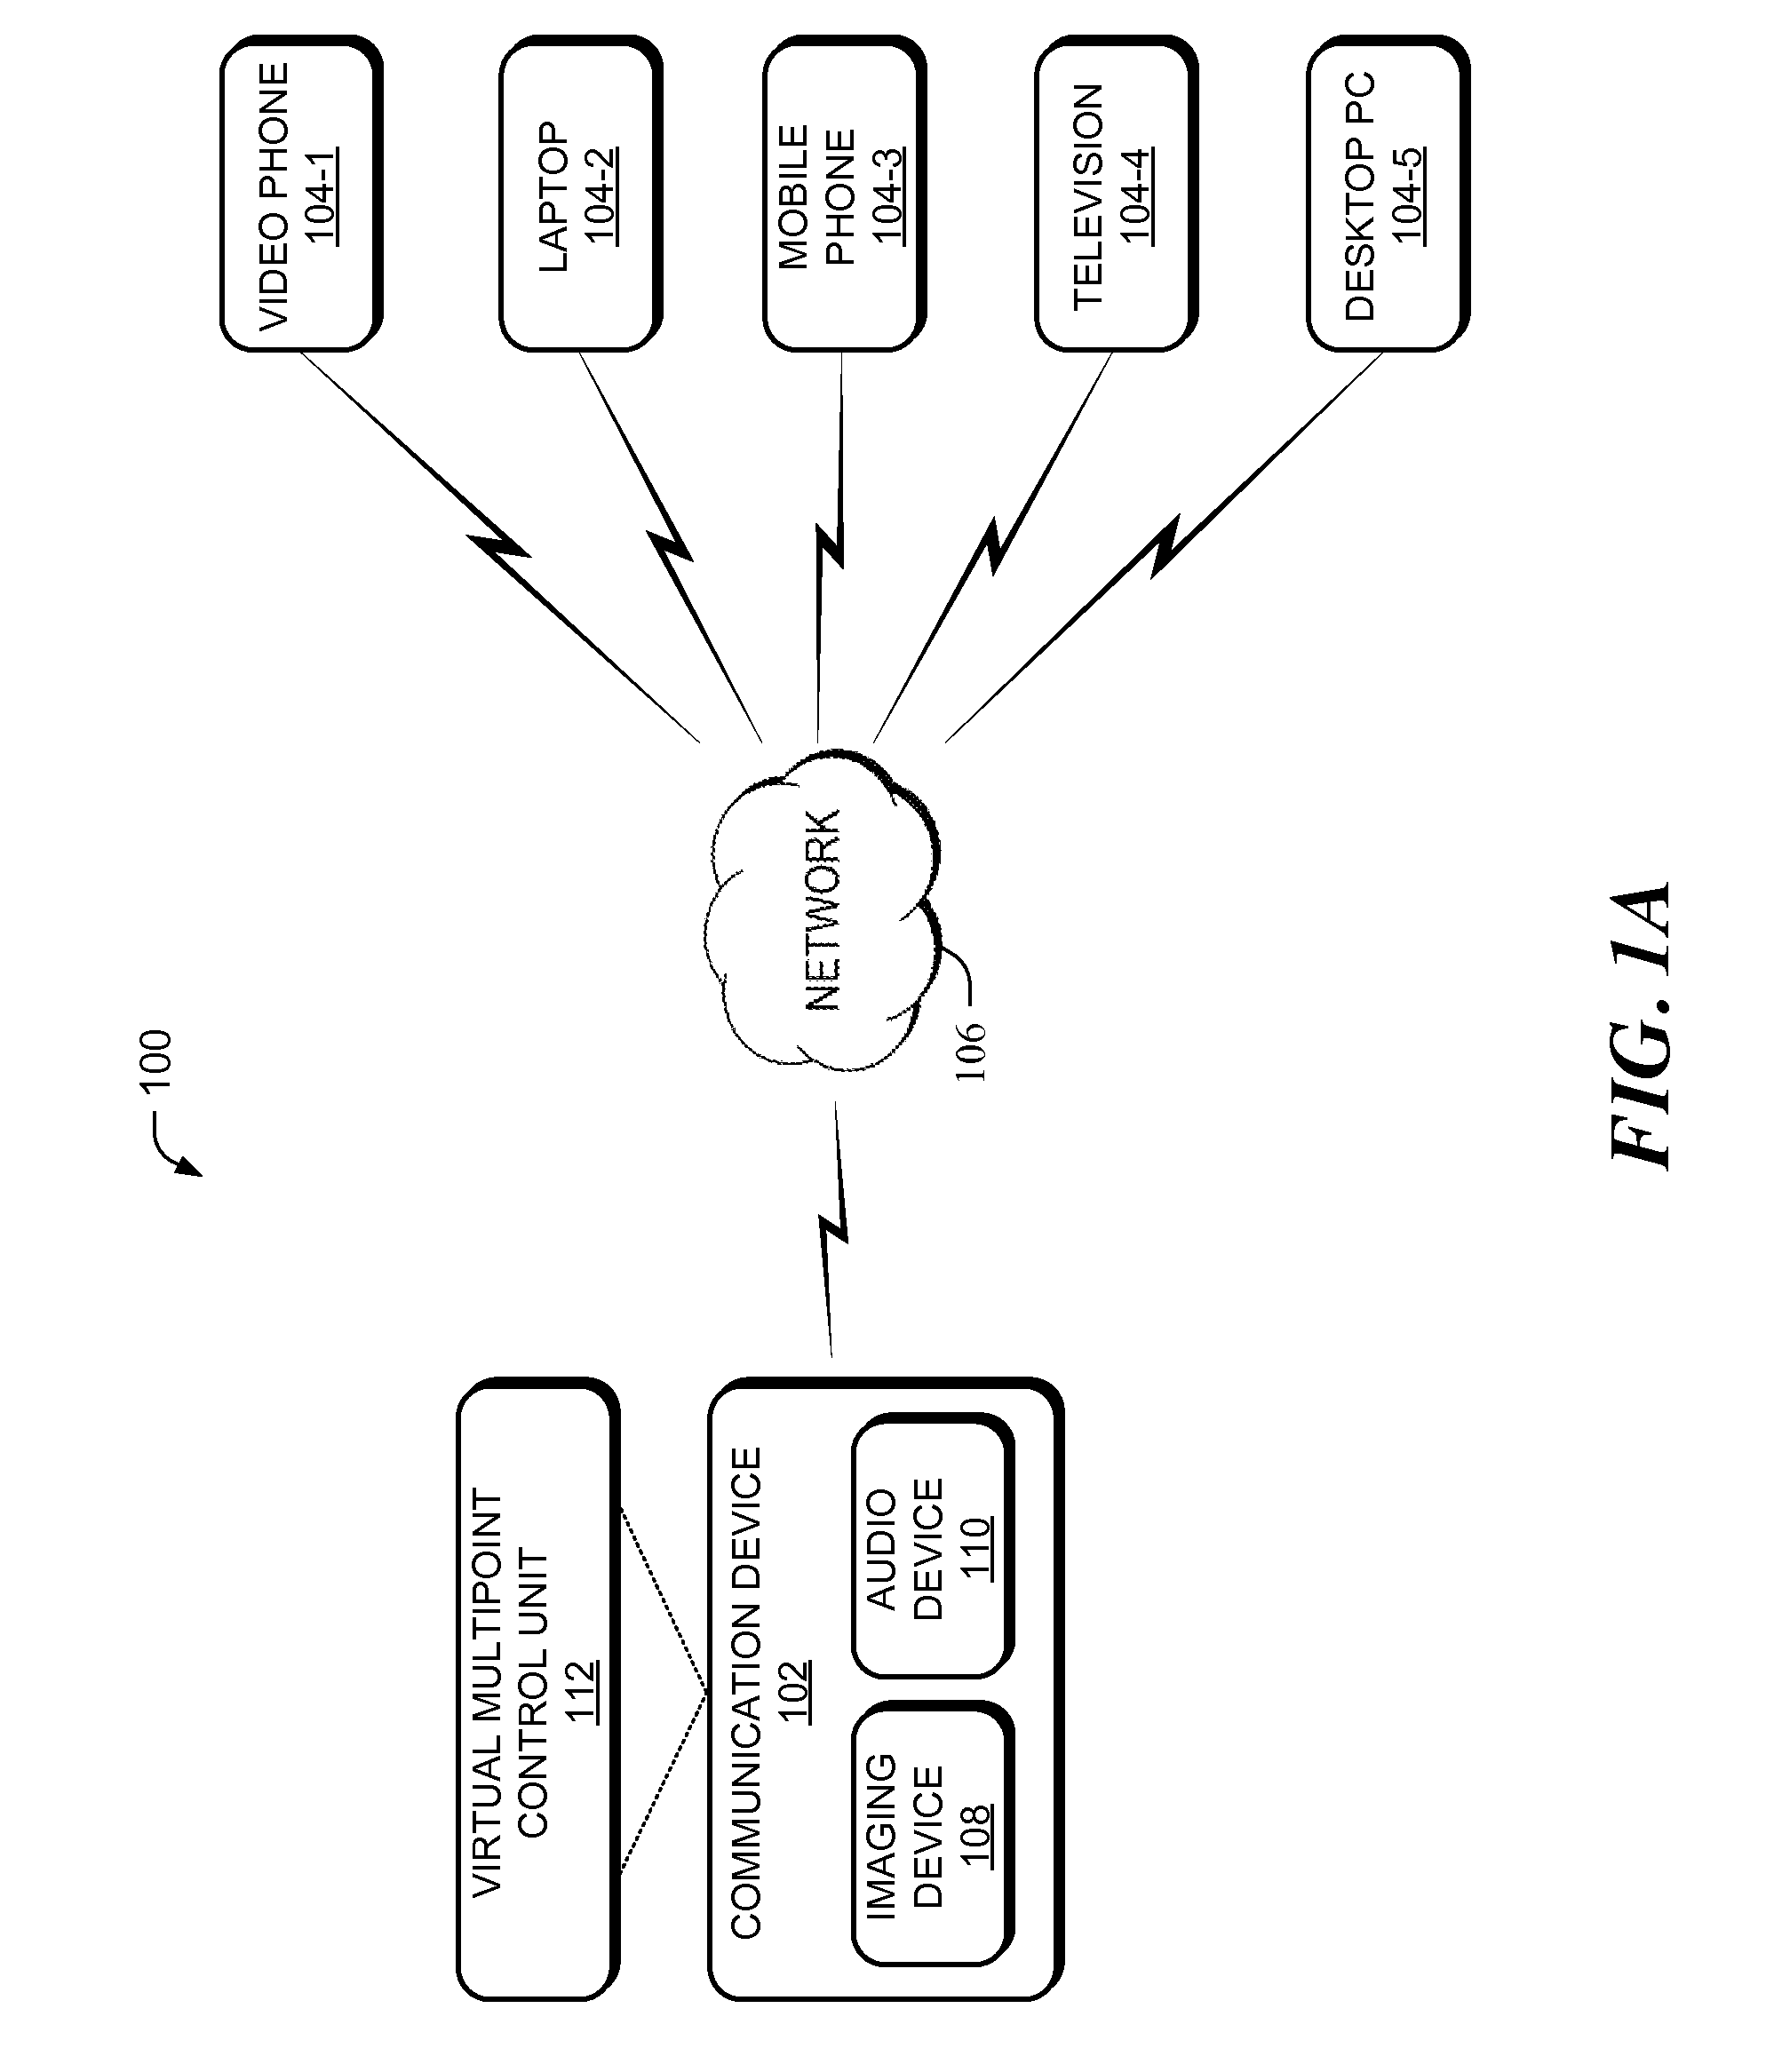 System for a Virtual Multipoint Control Unit for Unified Communications